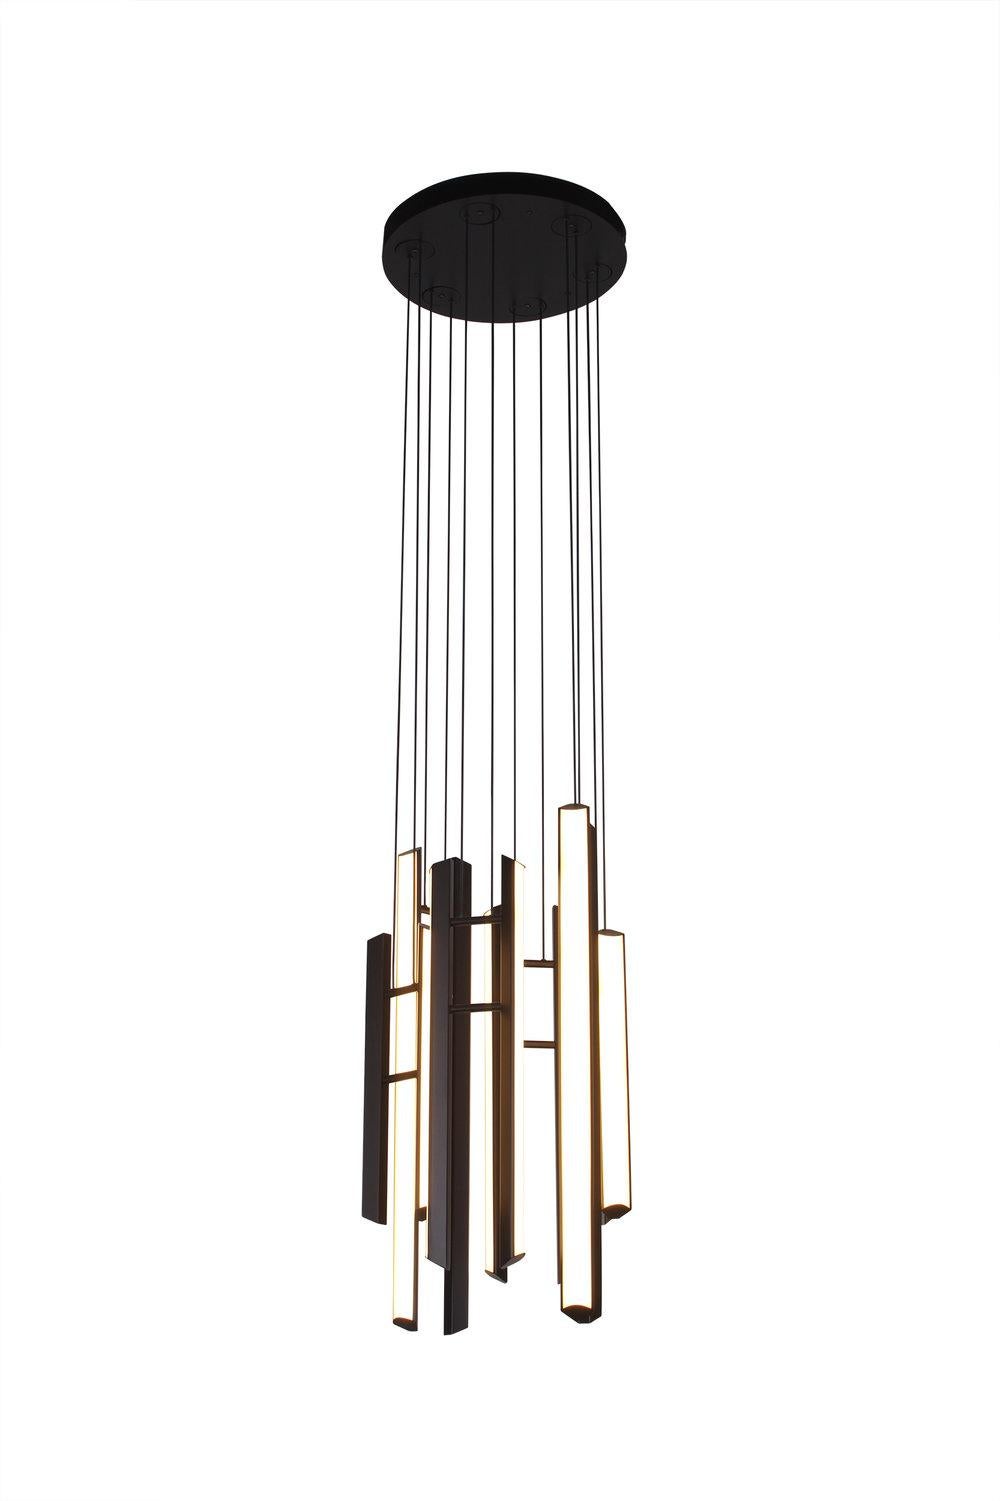 CHIME CHANDELIER suspends delicately balanced pairs of CHIME bars which are inspired by the harmonious sound of resonating bells. Both compact and customizable, CHIME CHANDELIER is an enchanting addition to a staircase or grand entry.

METAL